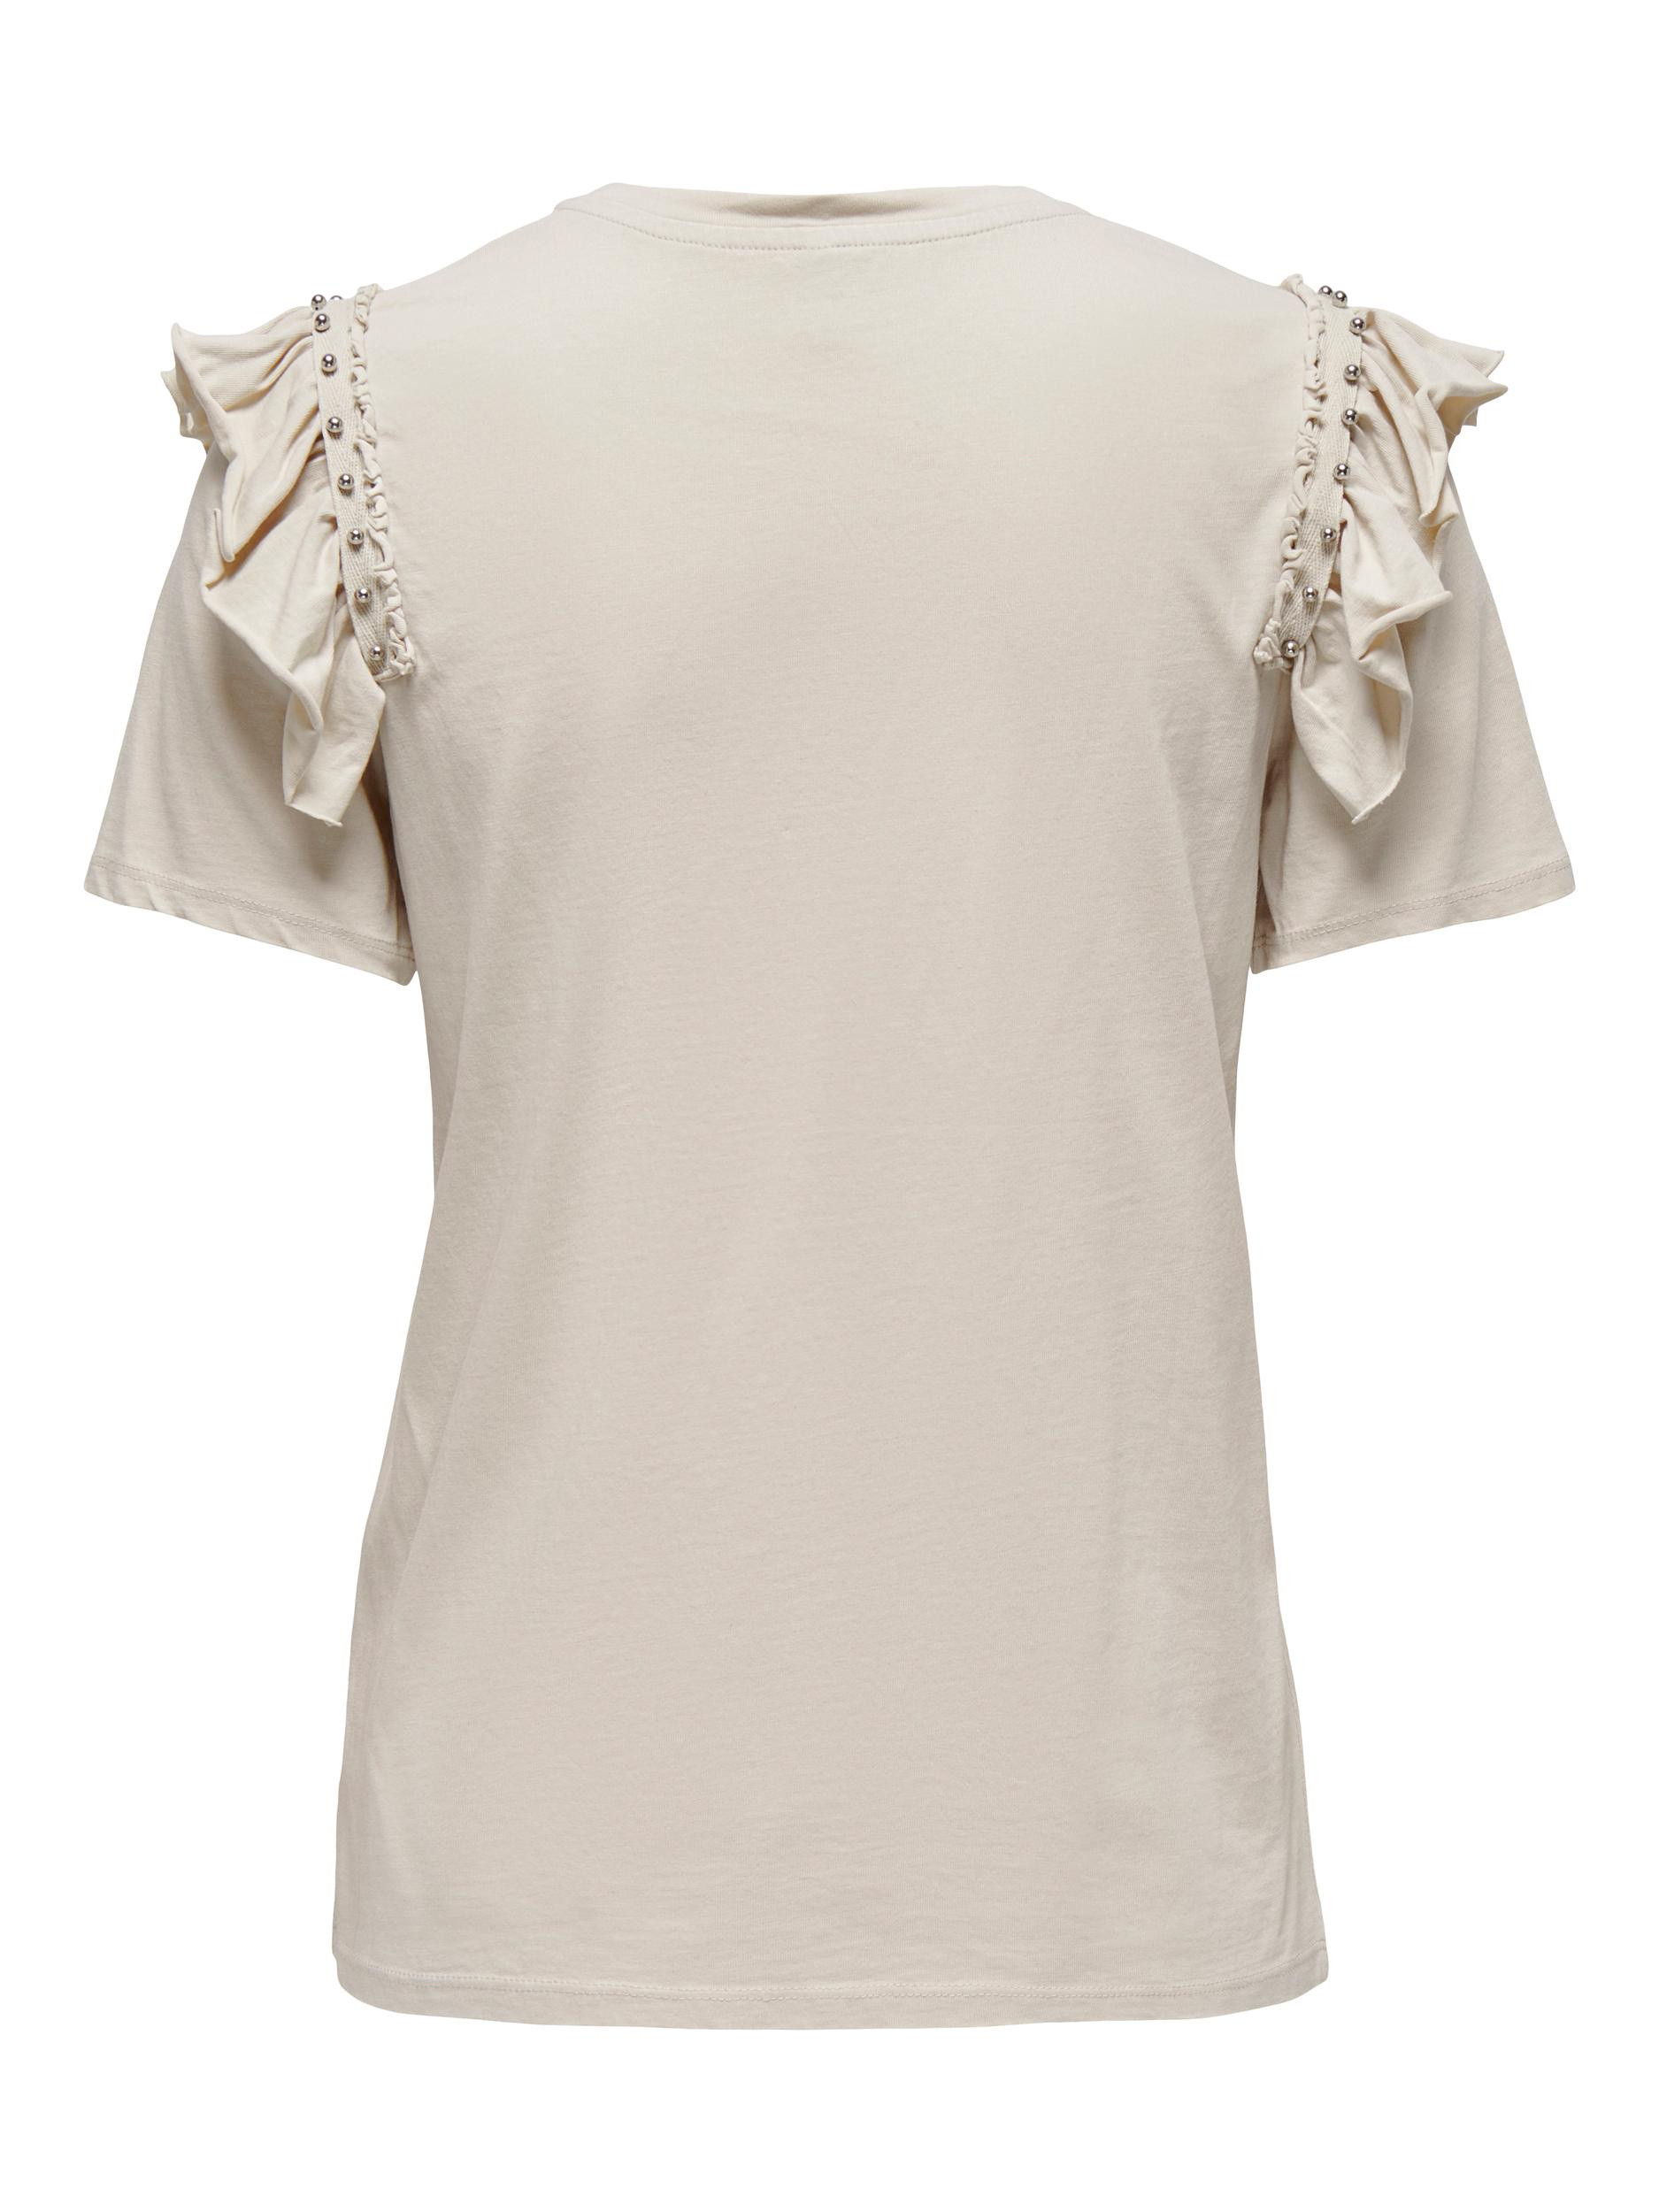 Only - T-shirt regular fit in cotone con volant, Beige, large image number 1